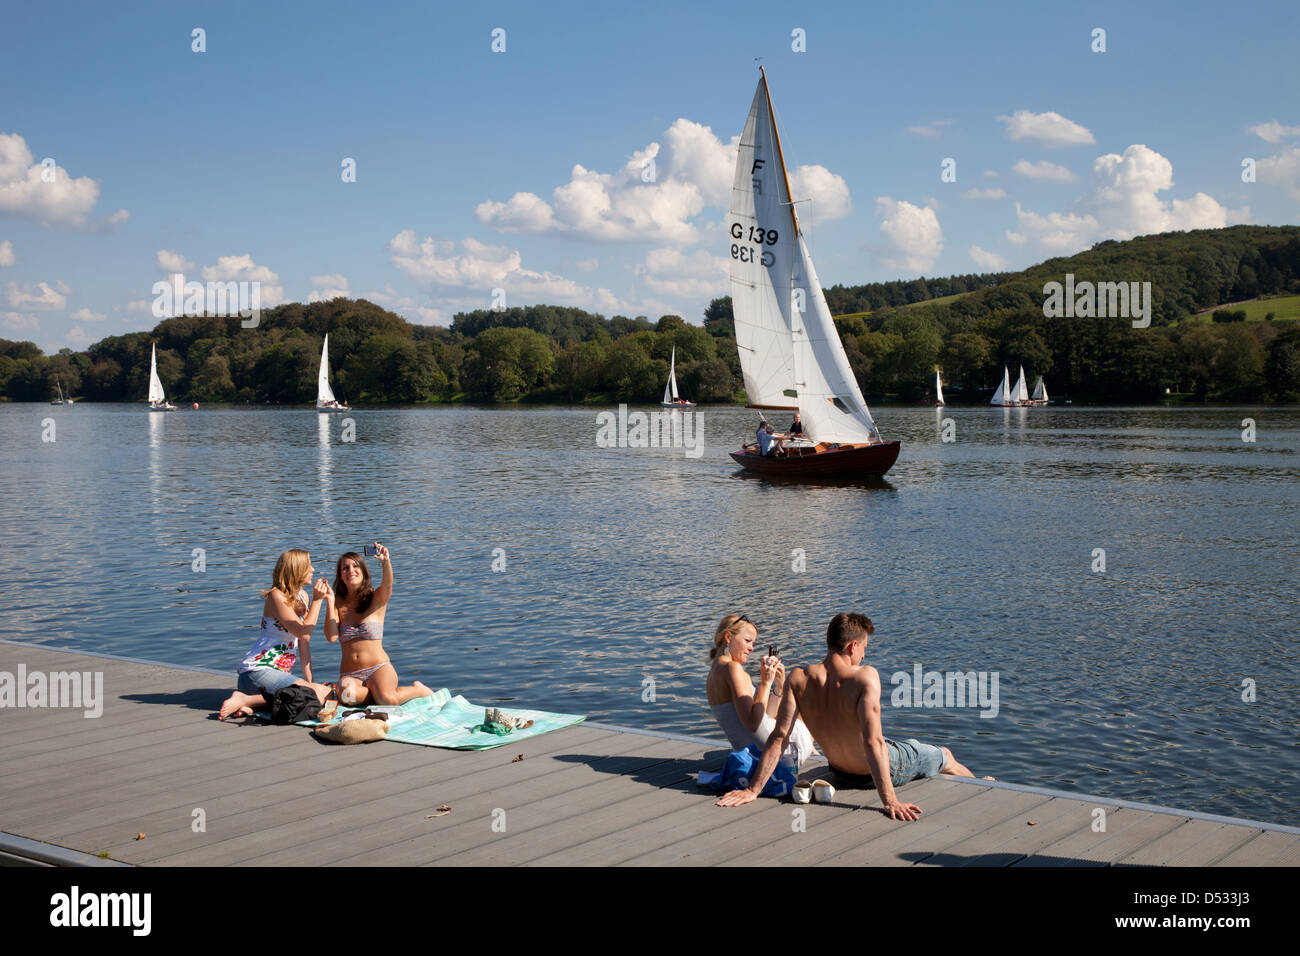 Essen, Germany, sailboats on the Baldeneysee and people at the boat dock Stock Photo